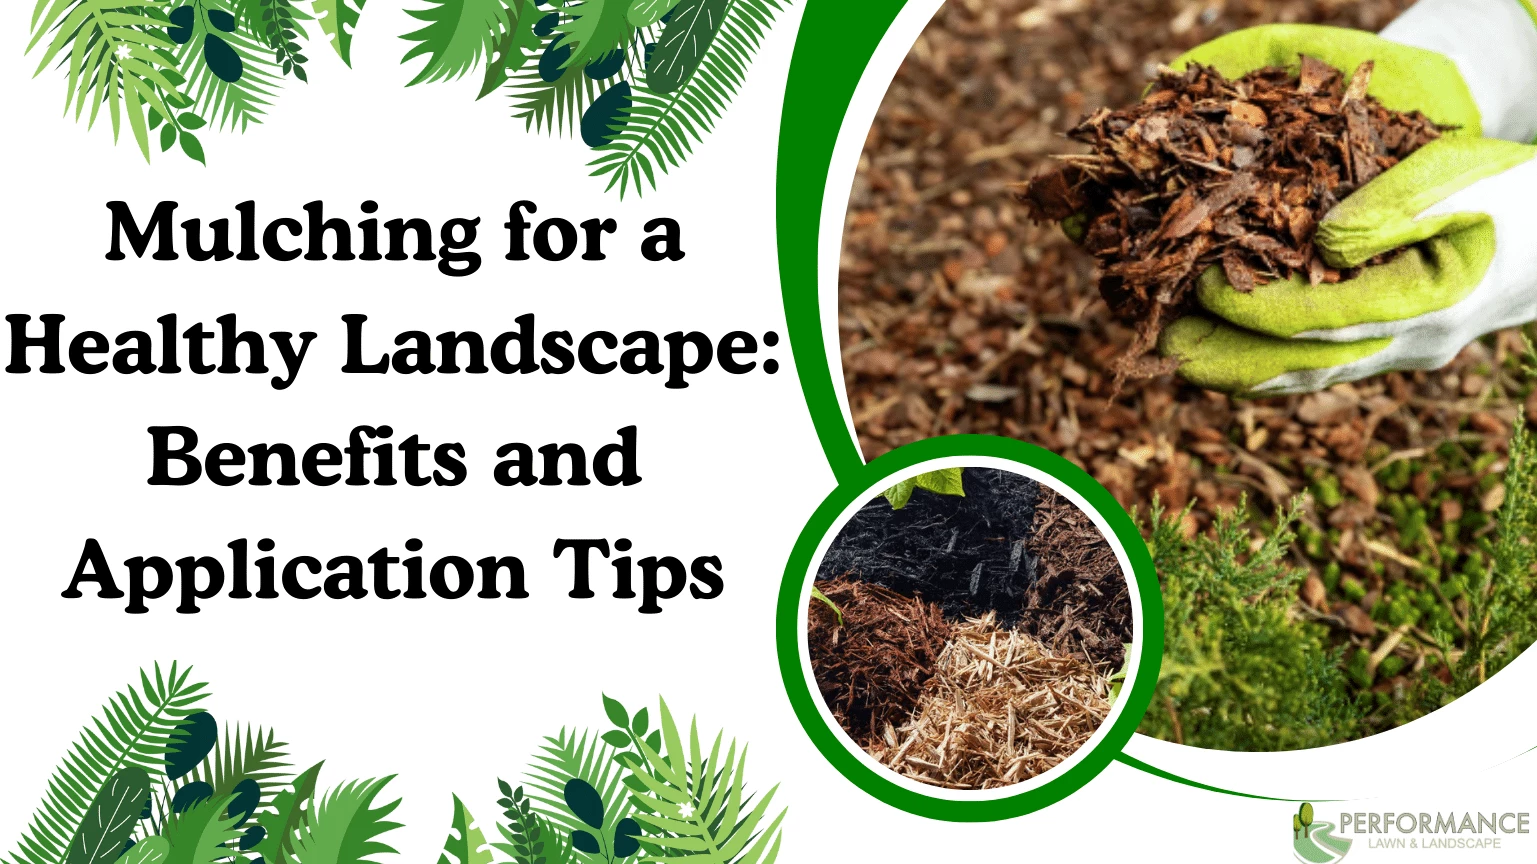 Mulching for a Healthy Landscape Benefits and Application Tips